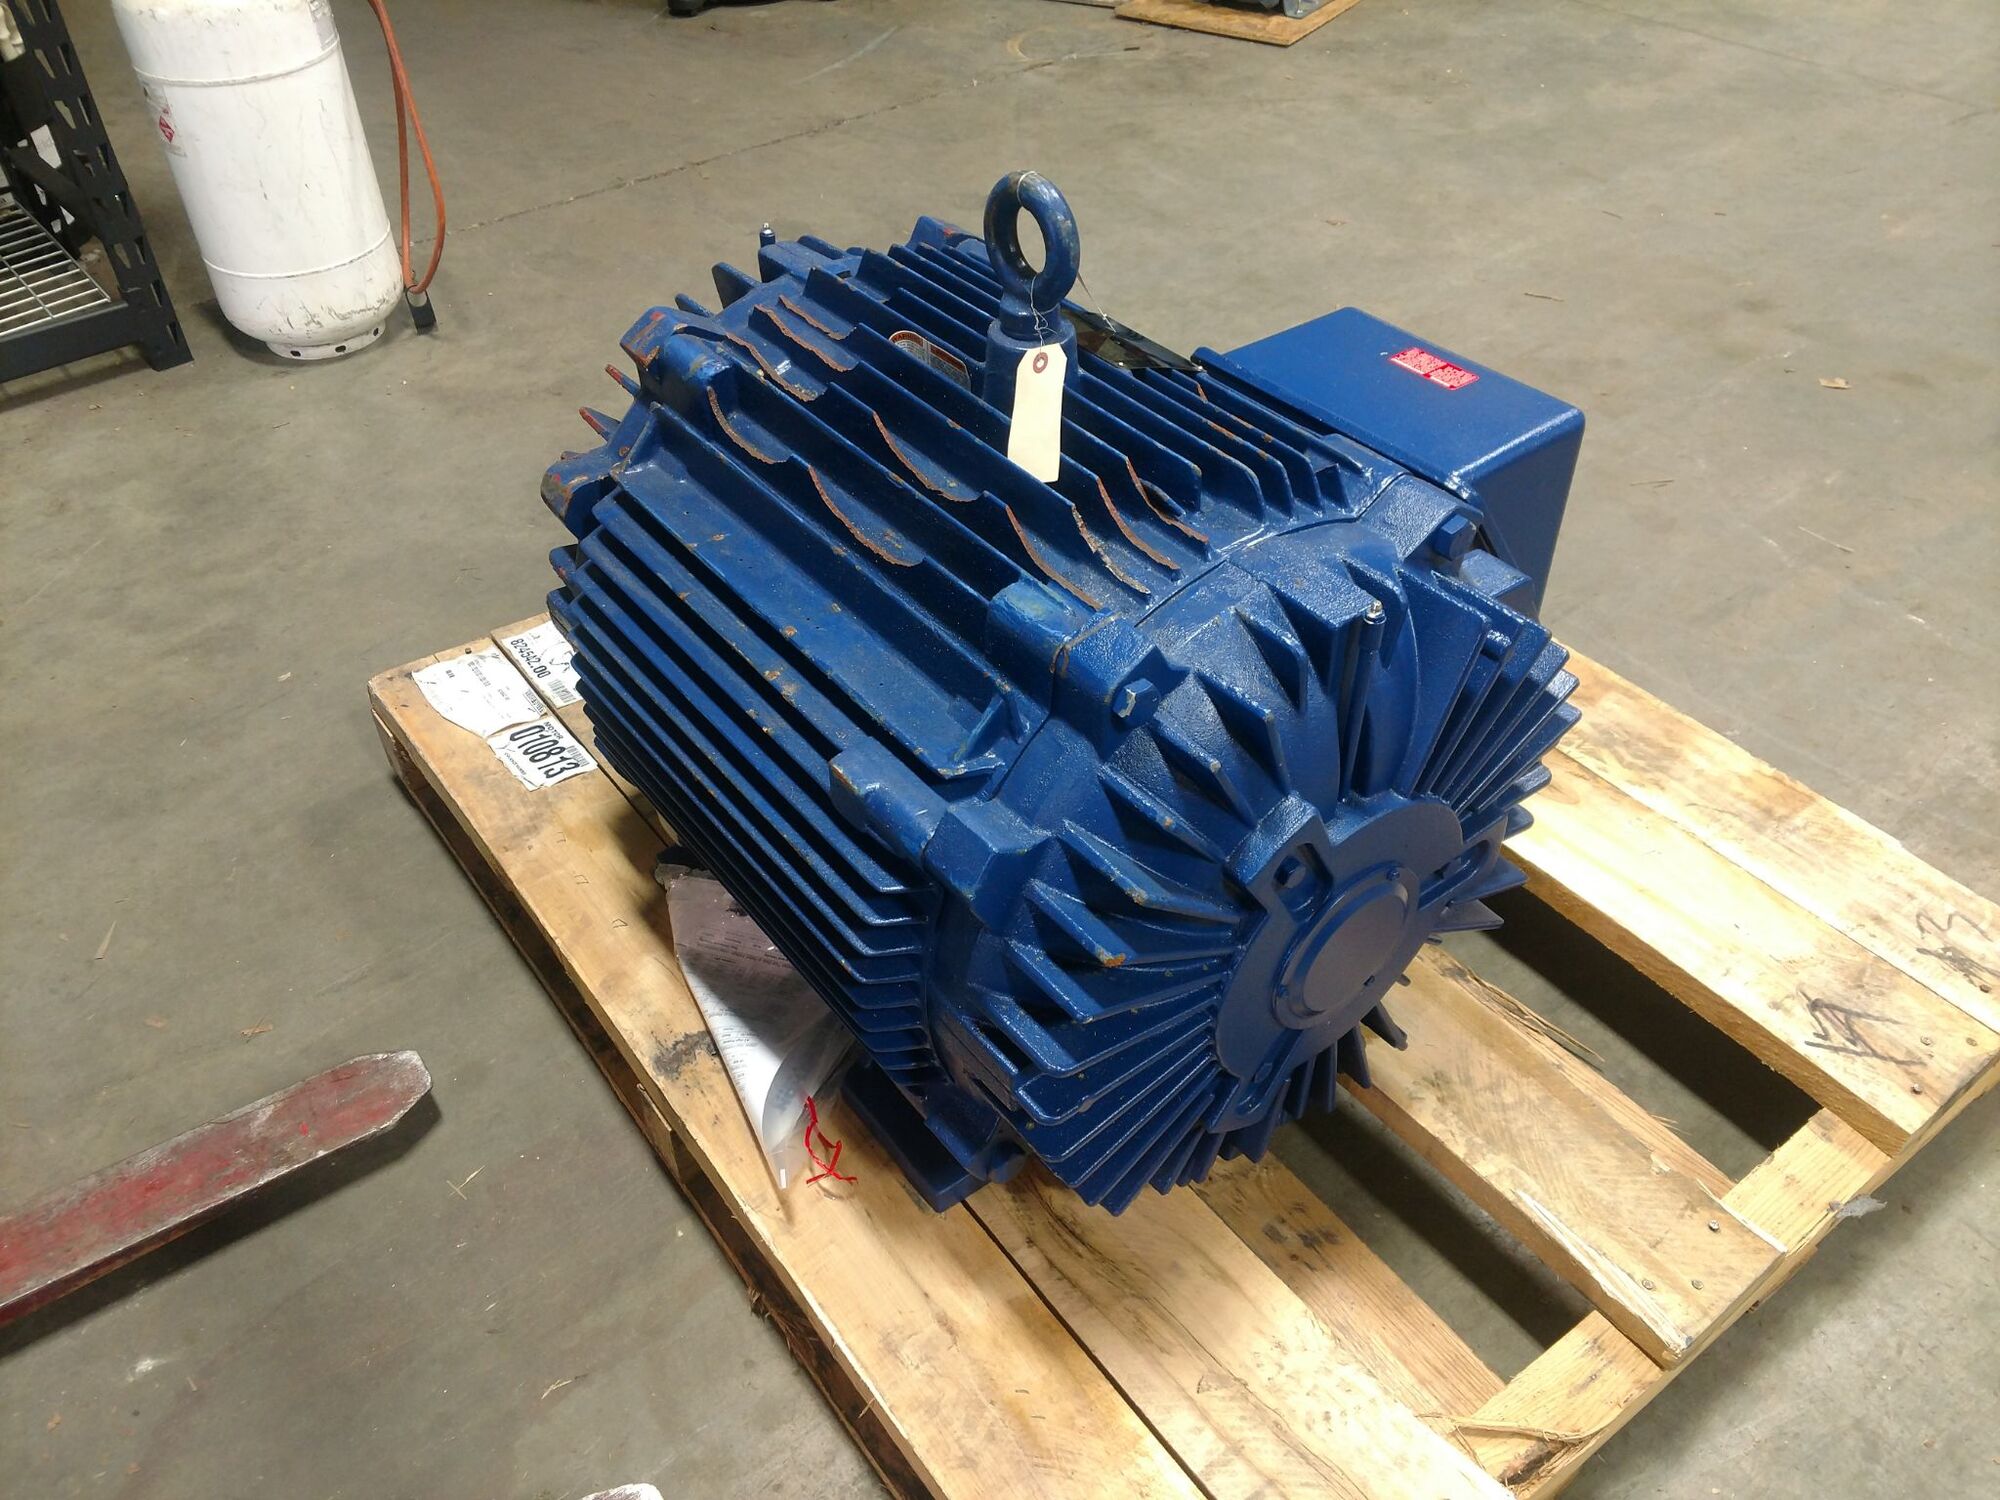 LEESON 824542.00 Electric Motor | Henry's Electric Motor Service Inc